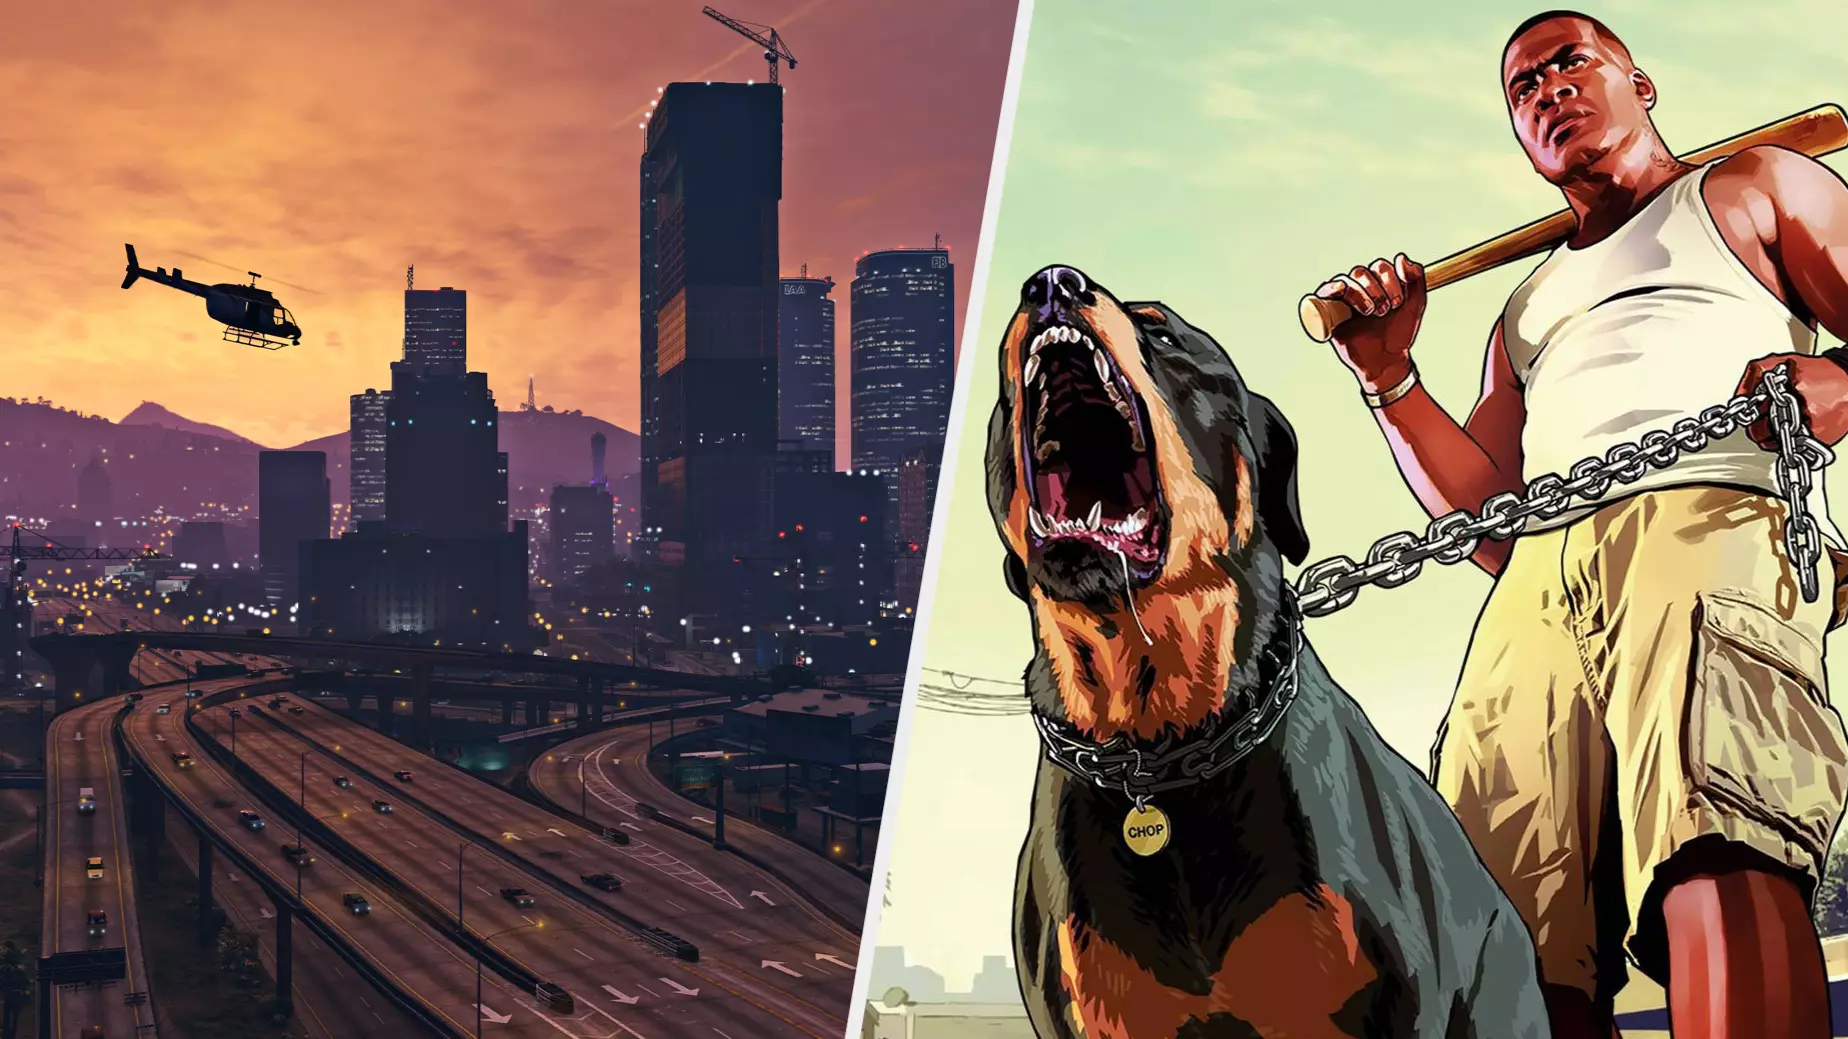 'GTA Online' Loading Times Reduced By 70% With A Few Simple Tweaks